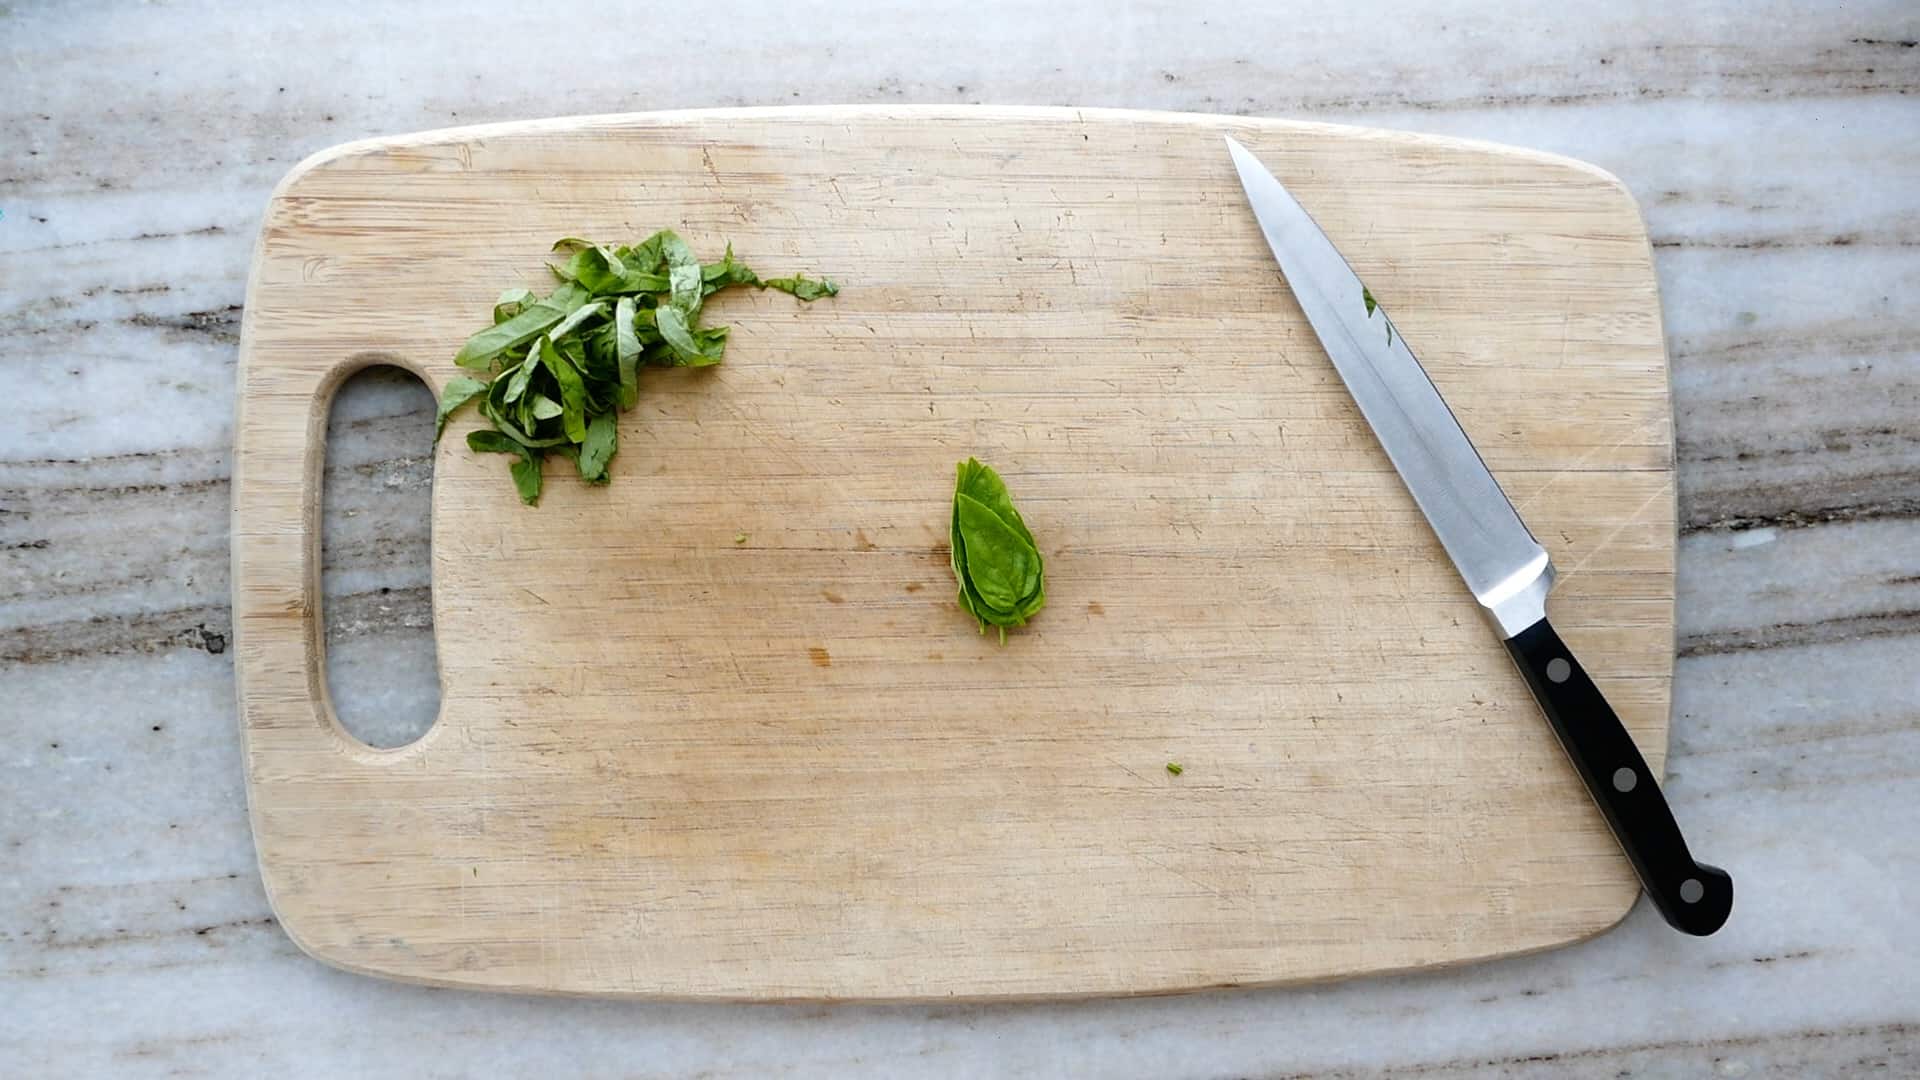 basil leaves in a stack in the center of a cutting board next to a knife